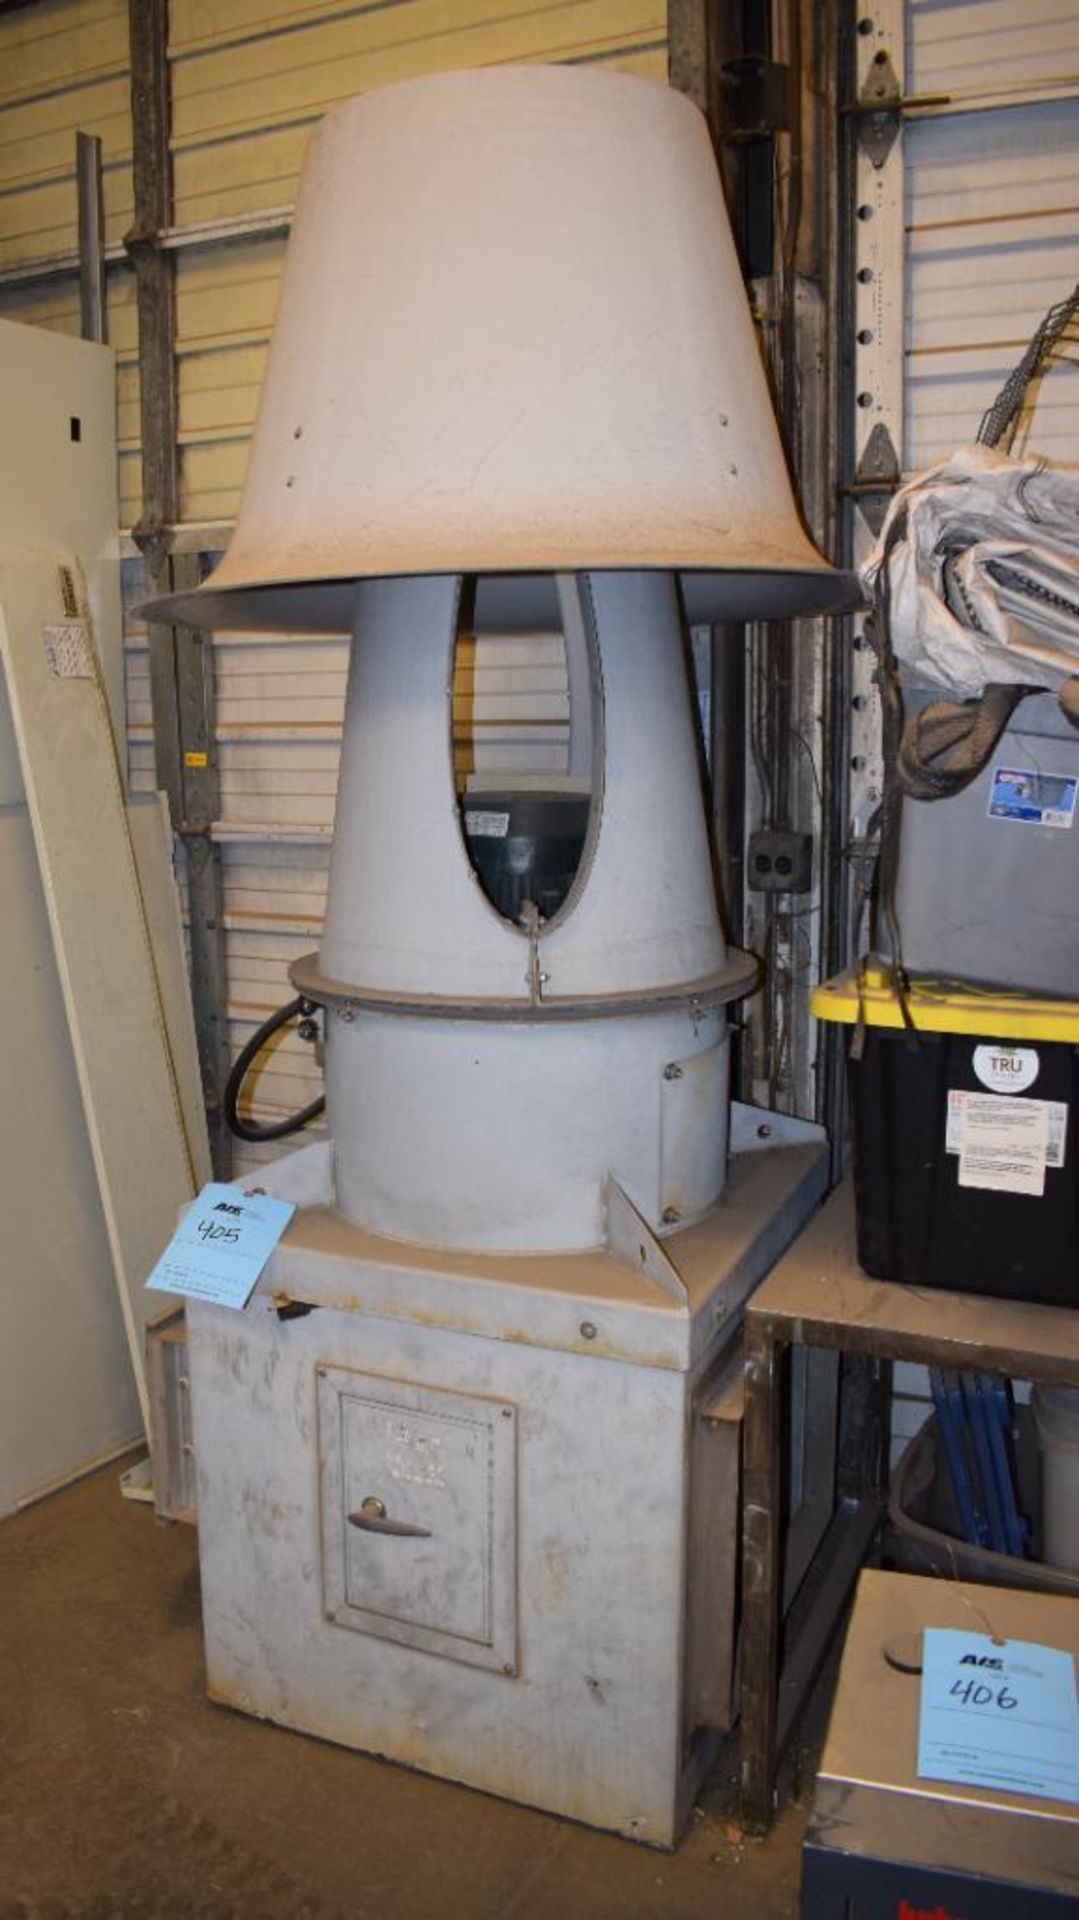 Strobic Air Tri-Stack Fume Hood Exhaust System, Model BS-002. Approximate 600 CFM. Serial# 9028. - Image 2 of 3